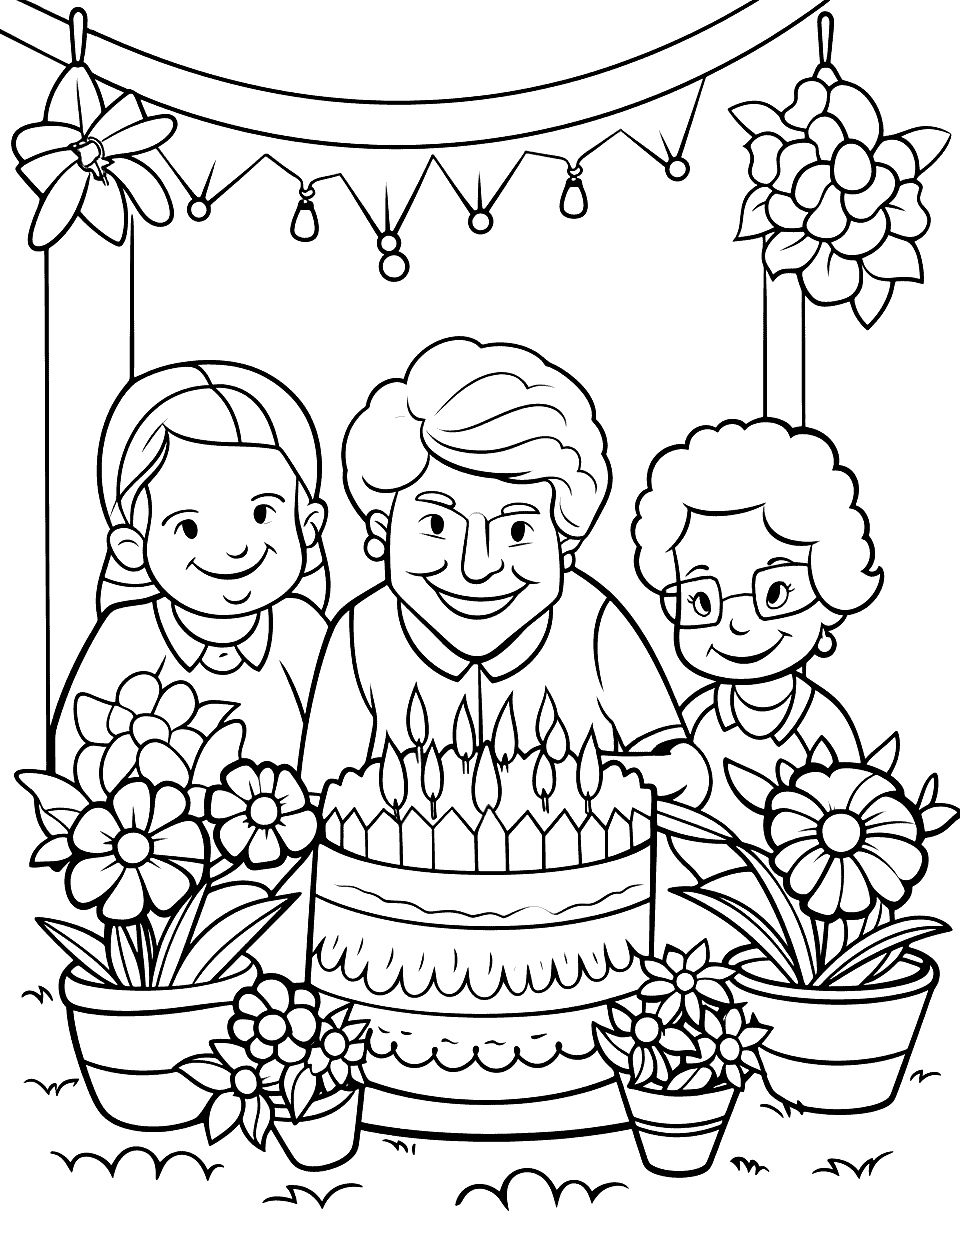 Grandma's Garden Birthday Happy Coloring Page - Grandma in her flower-filled garden, surrounded by family singing “Happy Birthday”.